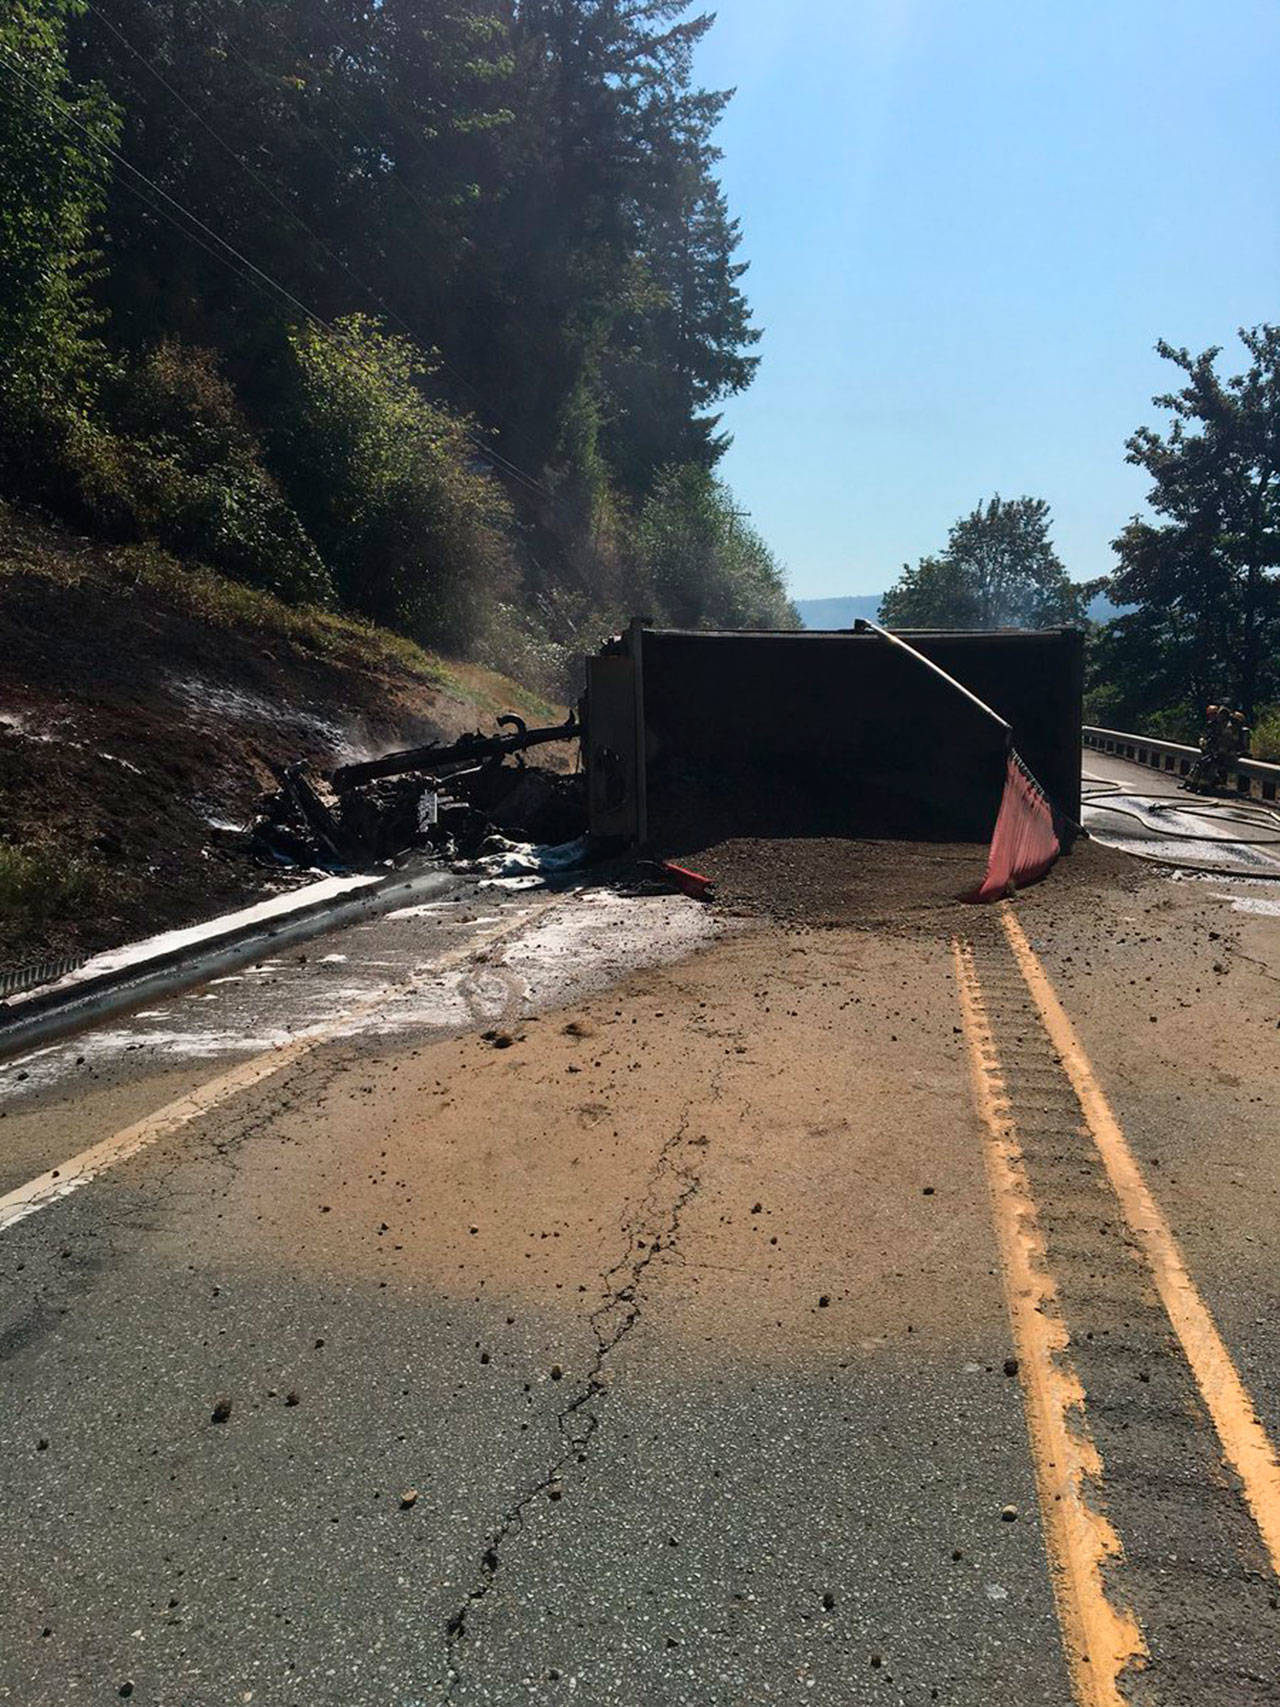 The dump truck was engulfed in flames when first responders arrived on the scene. Photos courtesy of Washington State Patrol Trooper Rick Johnson